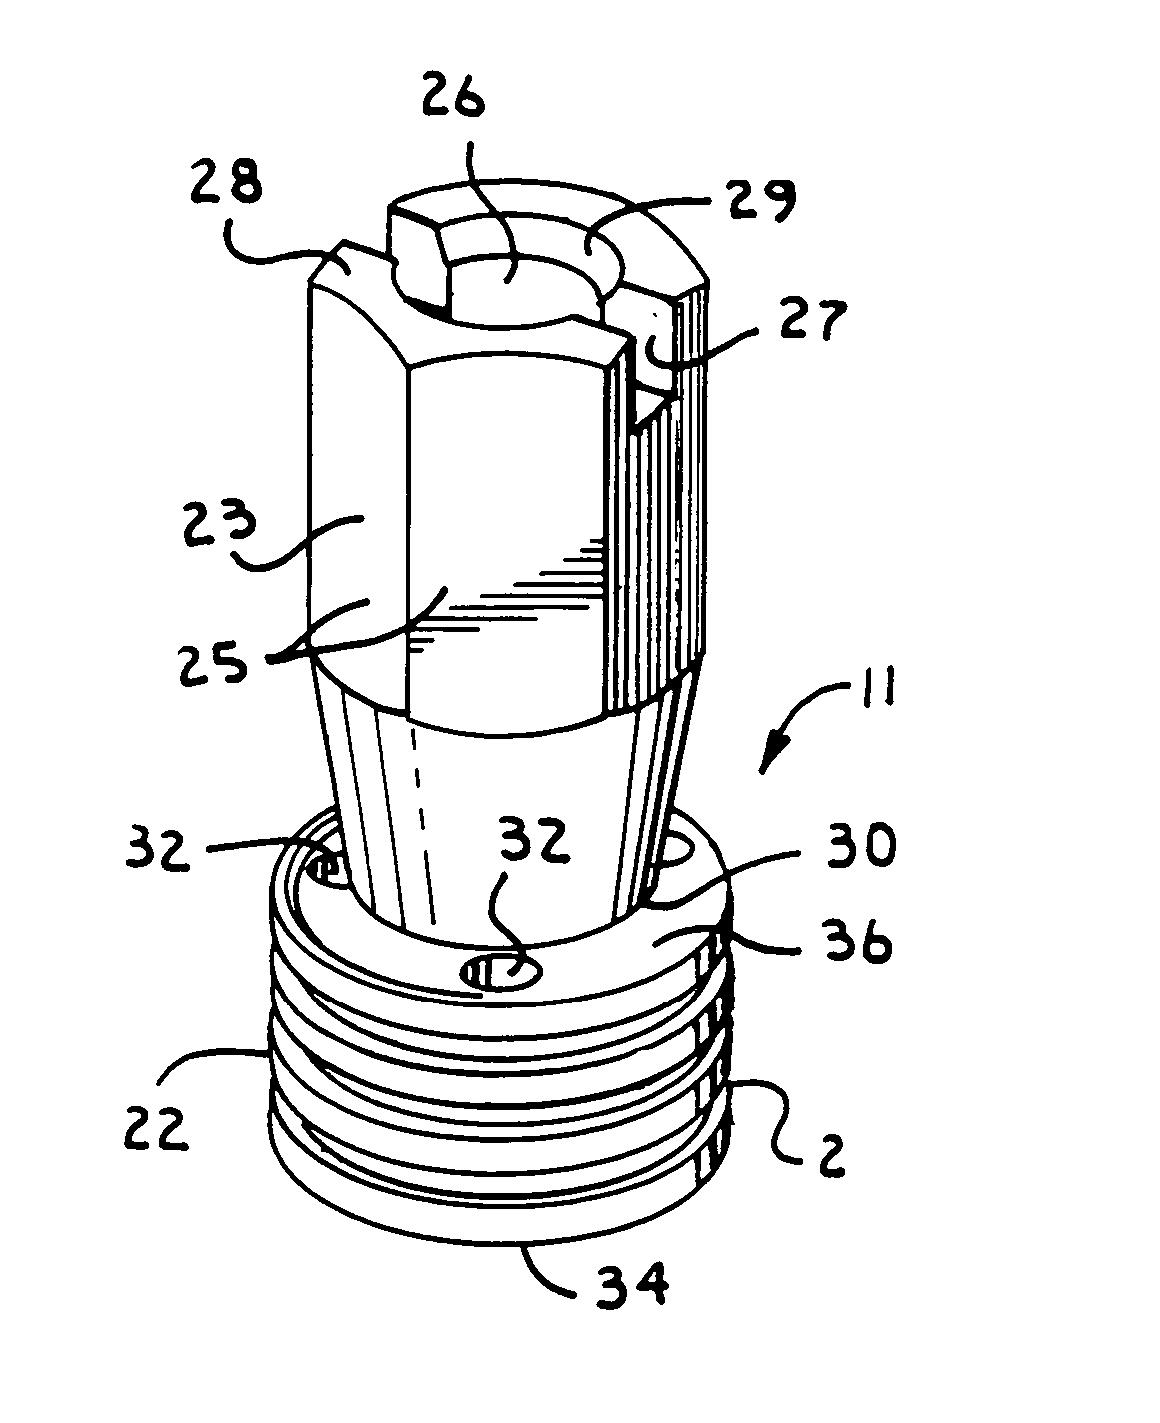 Helical interlocking mating guide and advancement structure